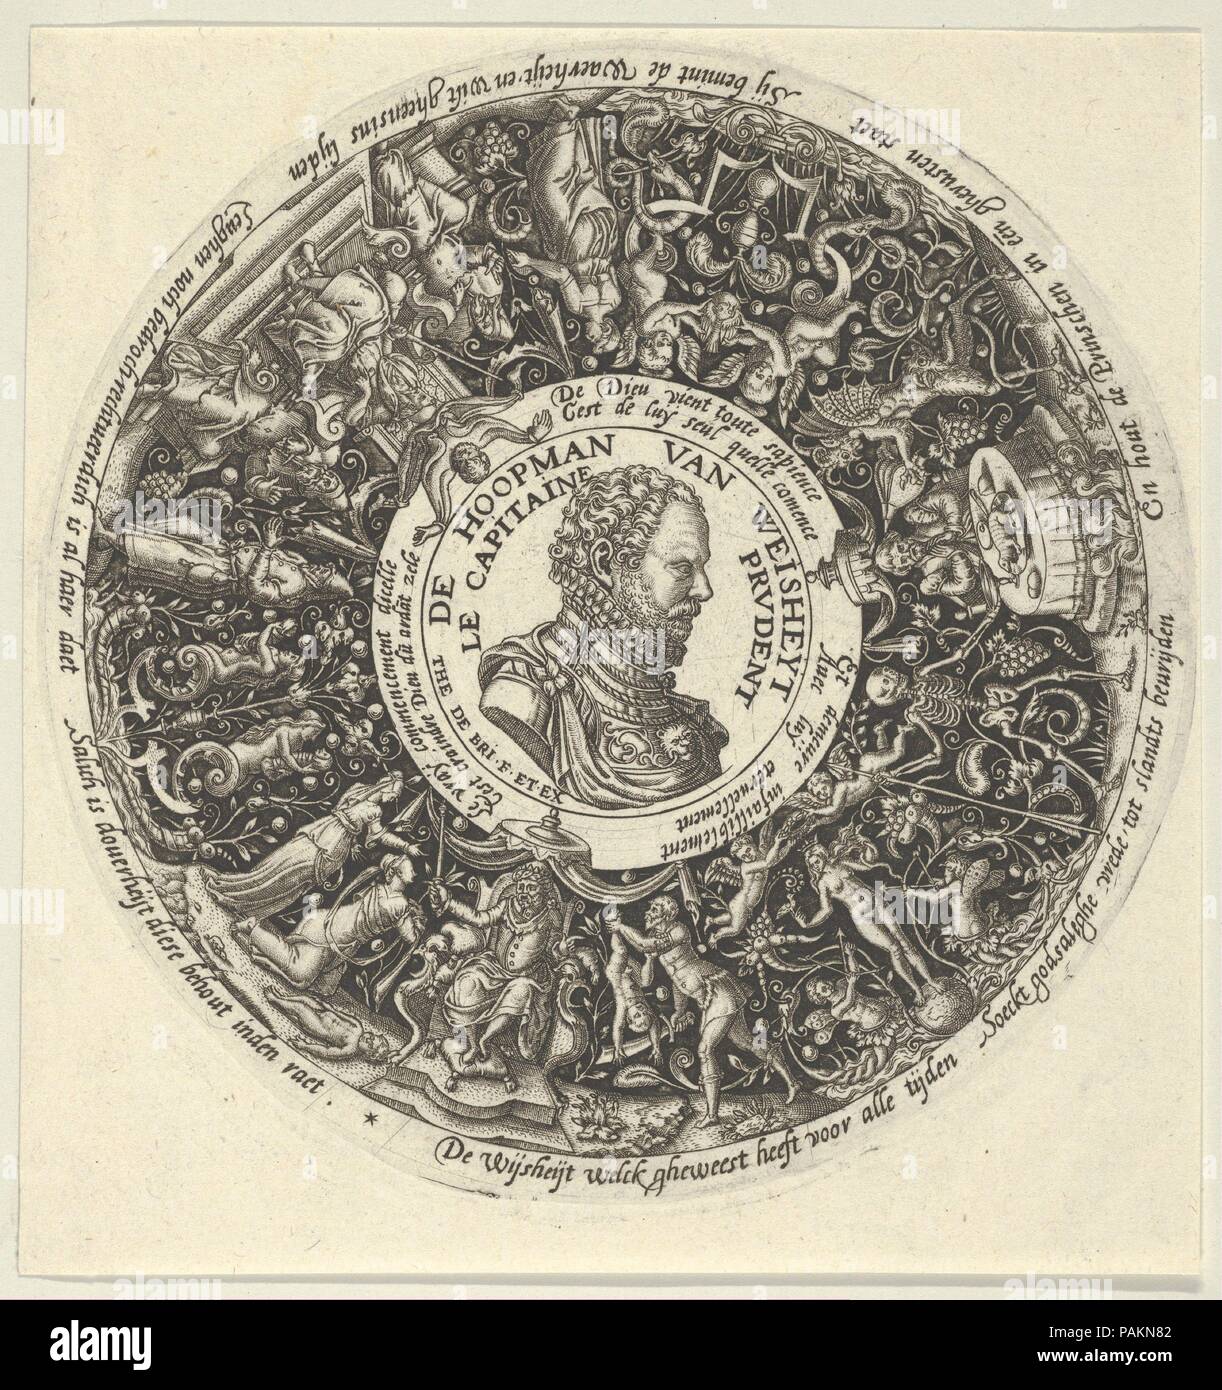 Portrait of William I of Orange, from a Series of Tazza Designs. Artist: Theodor de Bry (Netherlandish, Liège 1528-1598 Frankfurt). Dimensions: Sheet: 5 1/16 × 4 13/16 in. (12.9 × 12.3 cm). Date: ca. 1588.  In the central medallion, a portrait of William I of Orange as Commander of Wisdom, shown in profile facing right, framed by circular ornamental frieze. Depicted in the frieze below the medallion, a scene with the Judgement of Solomon. Museum: Metropolitan Museum of Art, New York, USA. Stock Photo